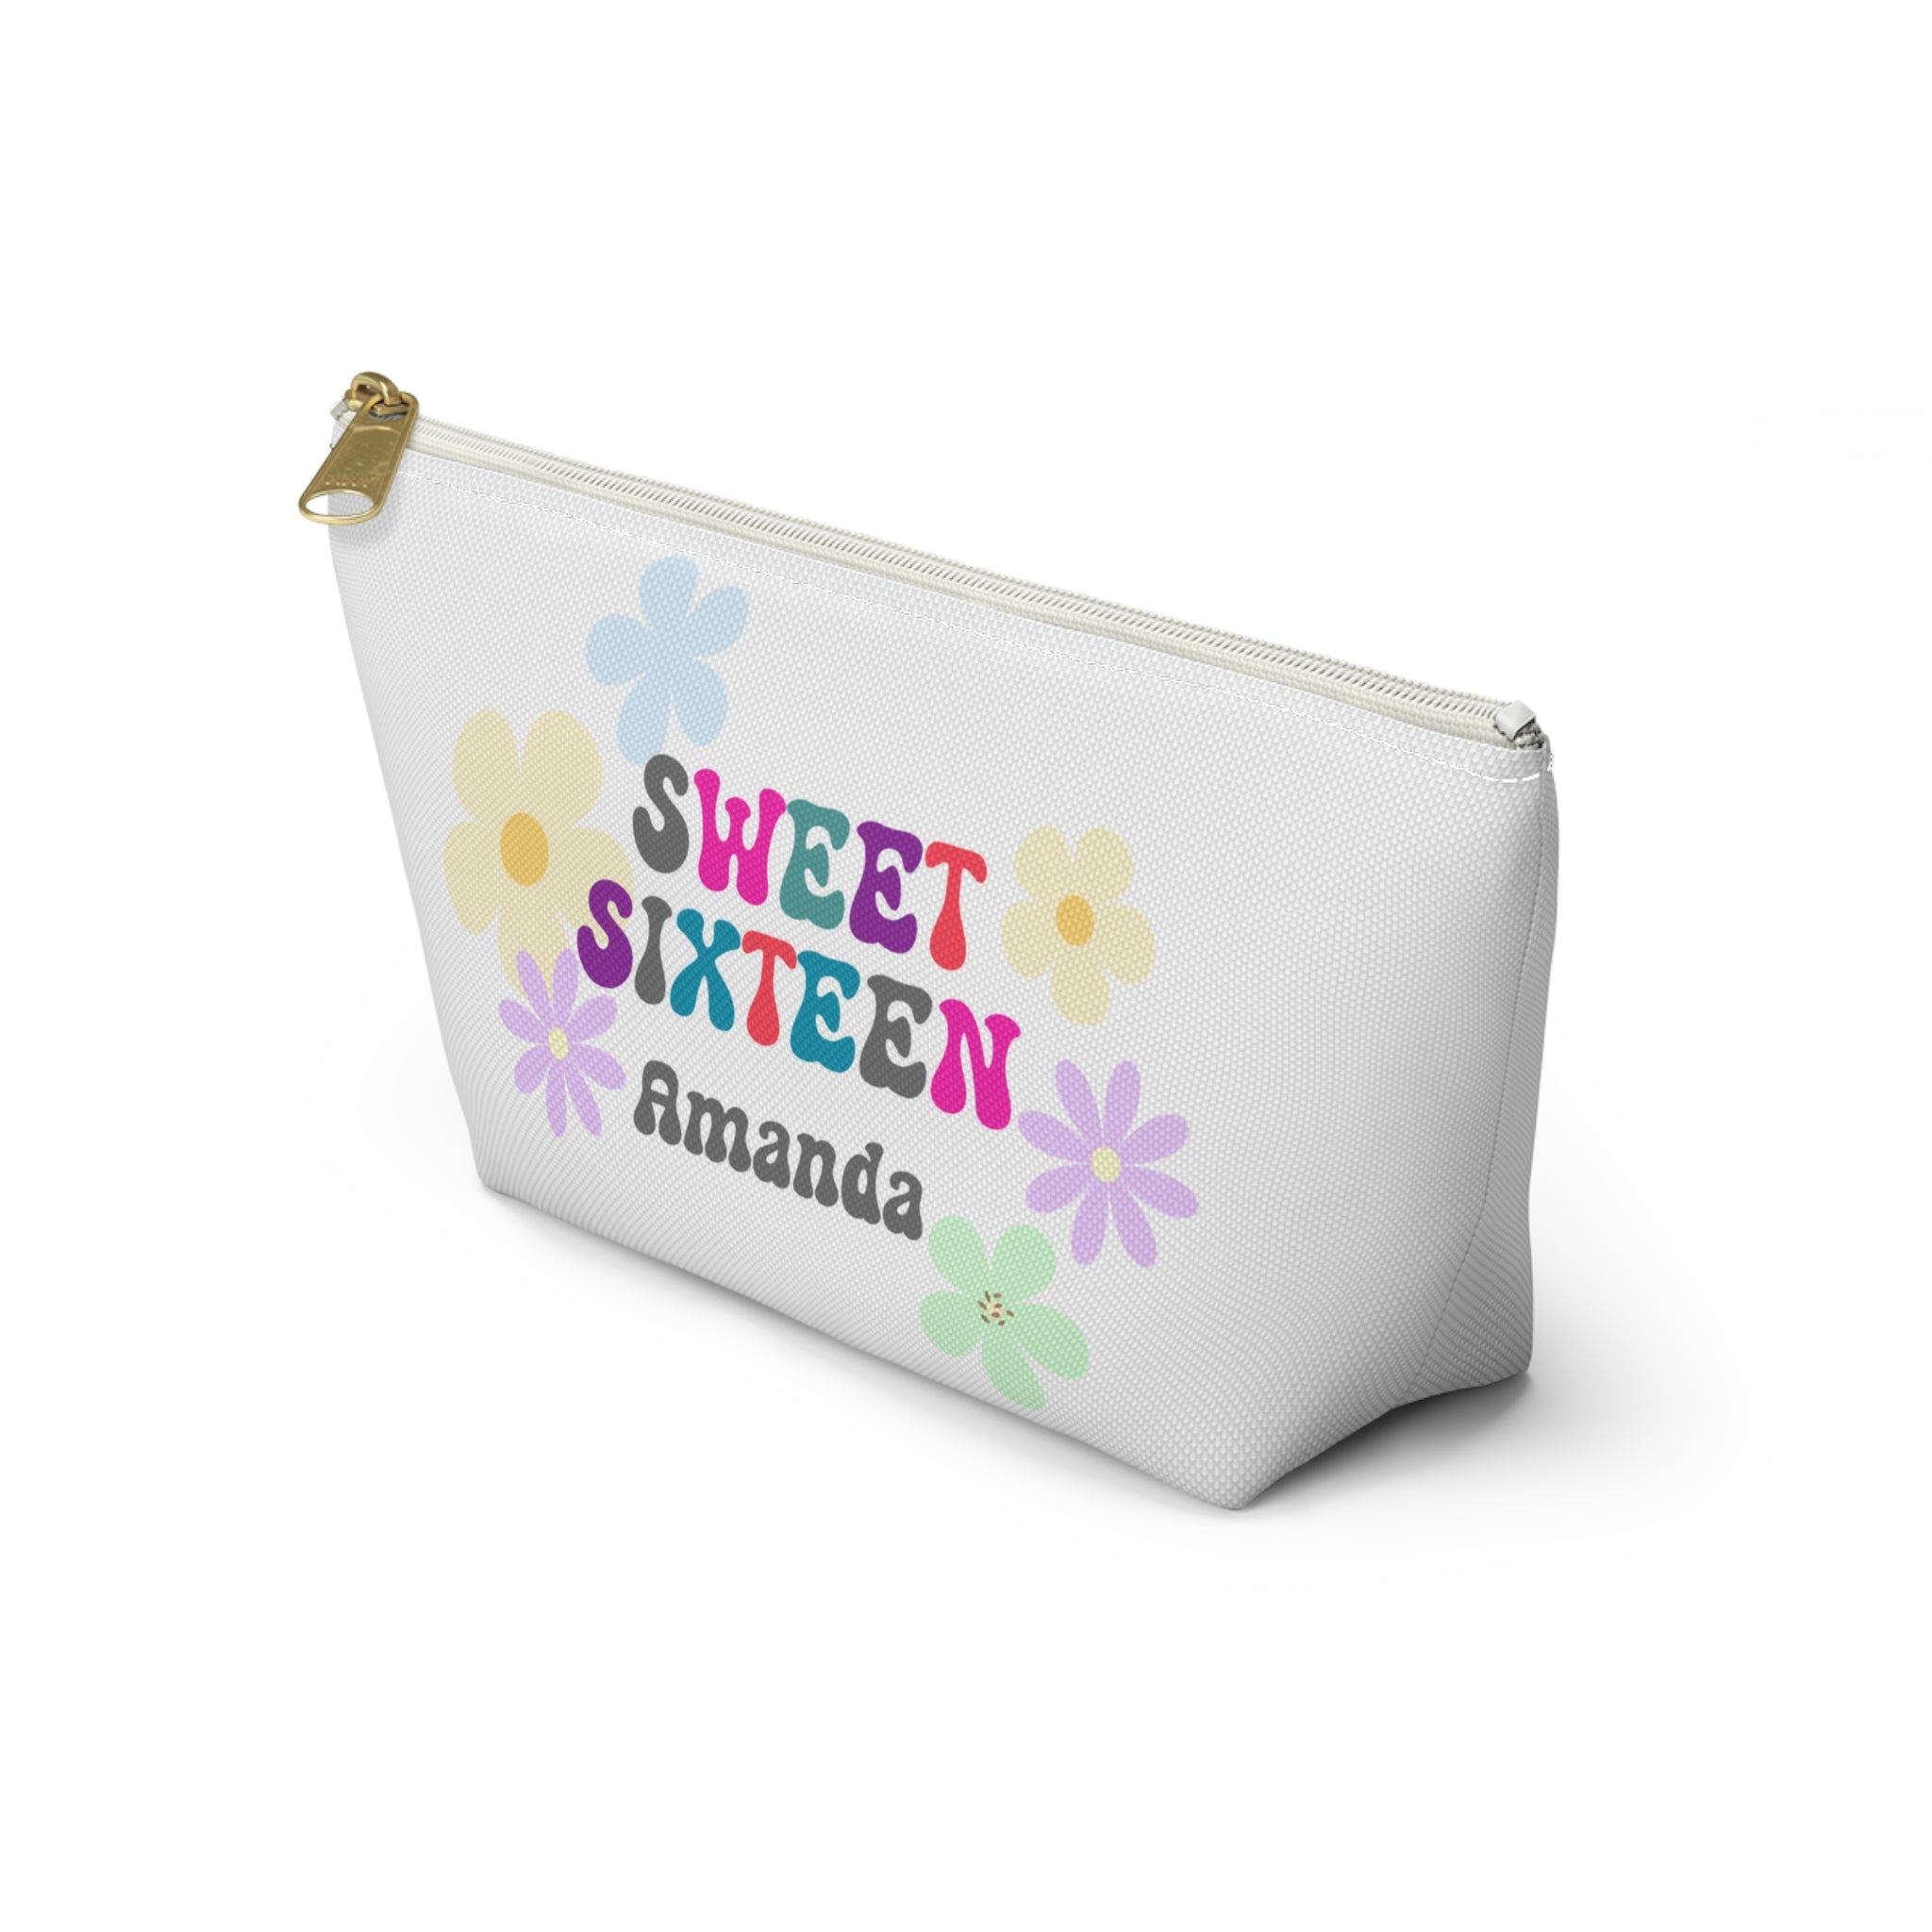 Sweet 16 Pouch- Personalization Option